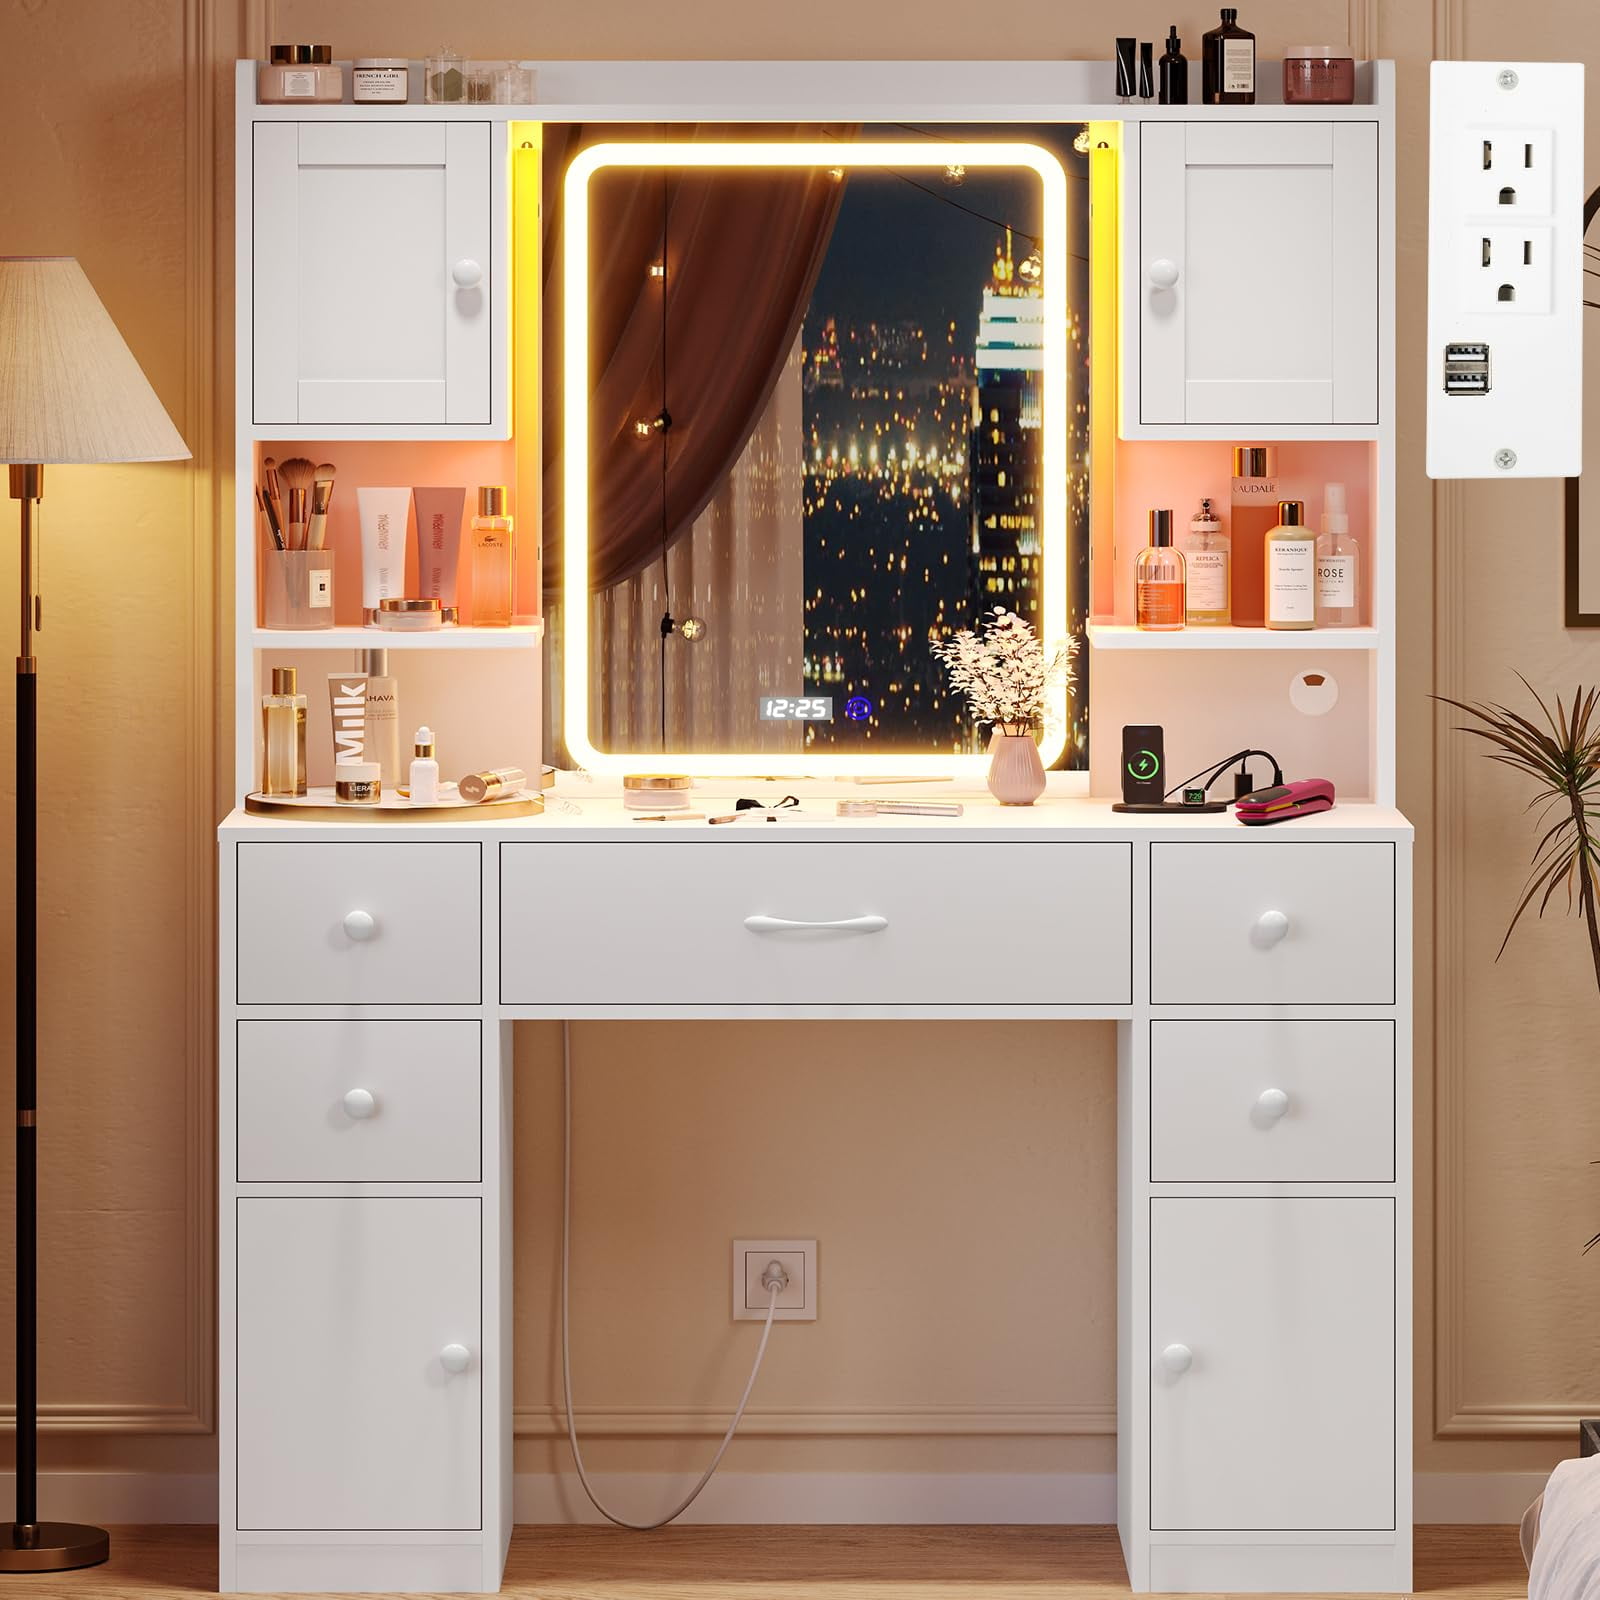 Boahaus Alana Black Vanity Desk with Mirror and Lights, Crystal Ball Knobs,  5 Drawers, White